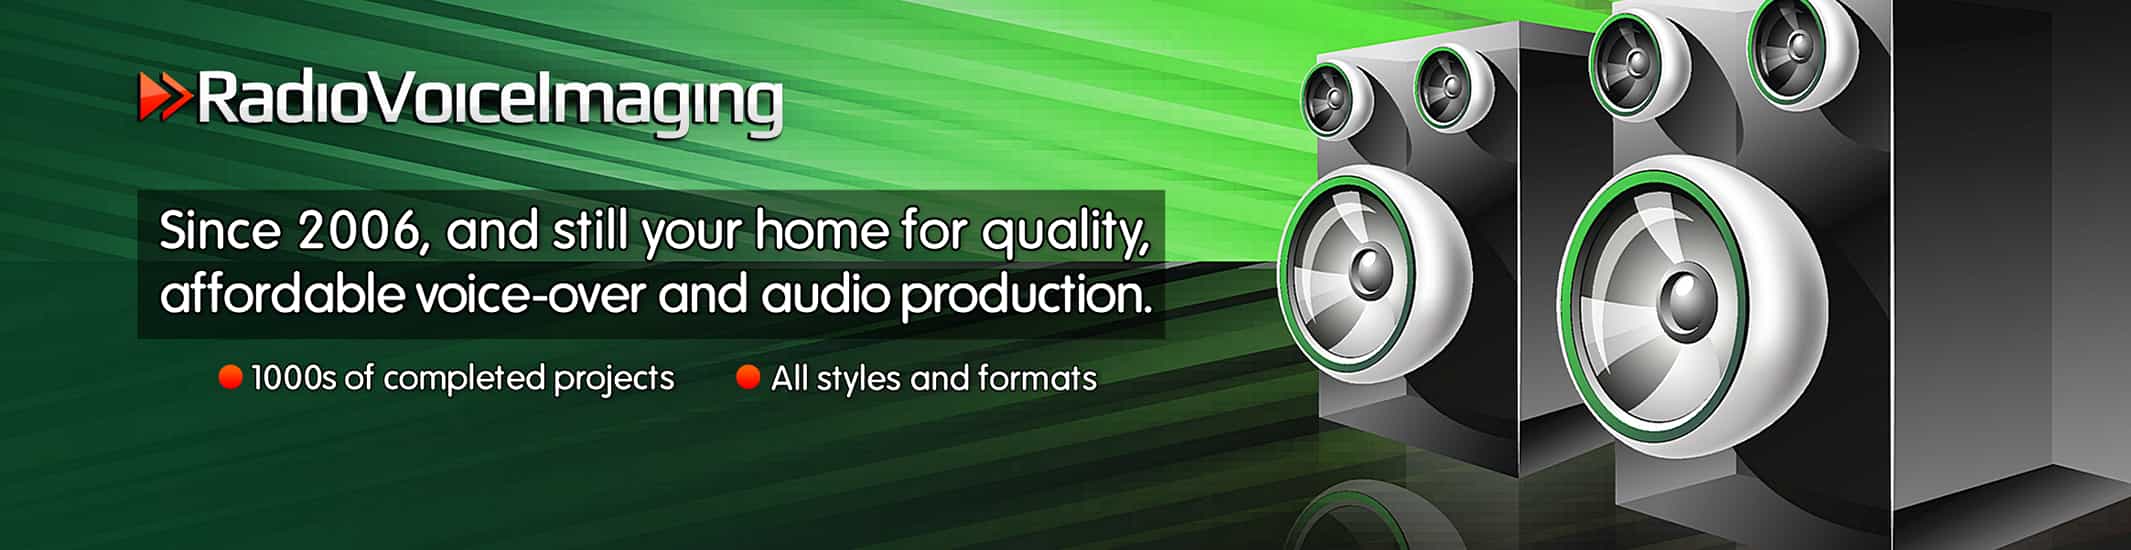 Since 2006 and still your home for affordable voice-over and production